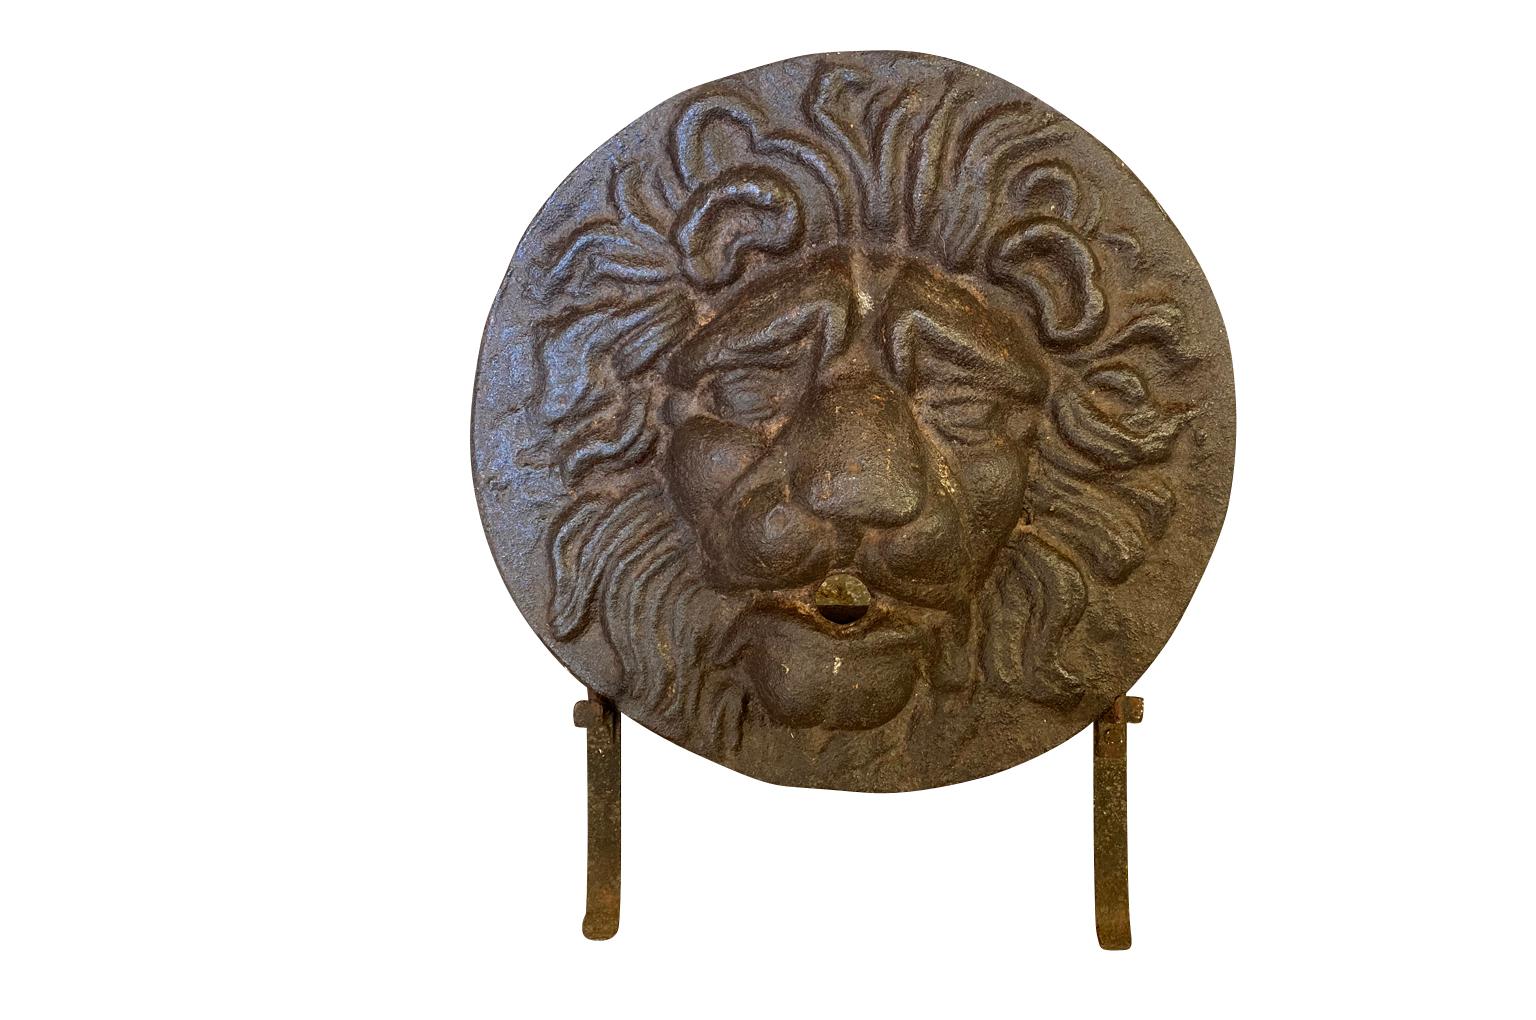 A very stunning 17th century - Louis XIV period Fountain Head - in the form of a lion. Beautifully crafted in cast iron - now resting on its stand. A striking accent piece for any bookcase or table top or again used as a fountain head. The diameter